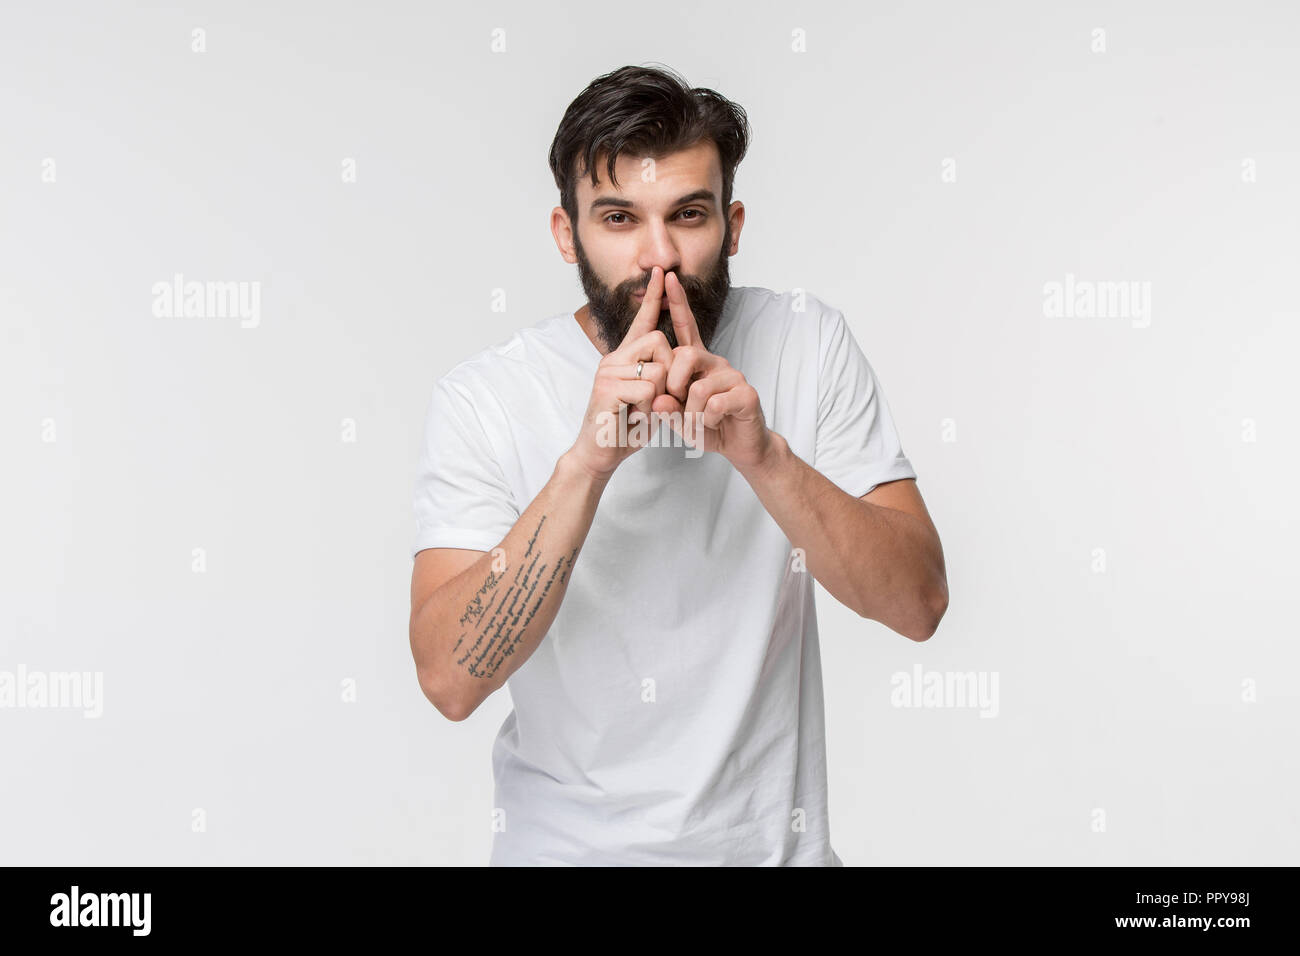 Secret, gossip concept. Young man whispering a secret behind his hand. Businessman isolated on white studio background. Young emotional man. Human emotions, facial expression concept. Stock Photo